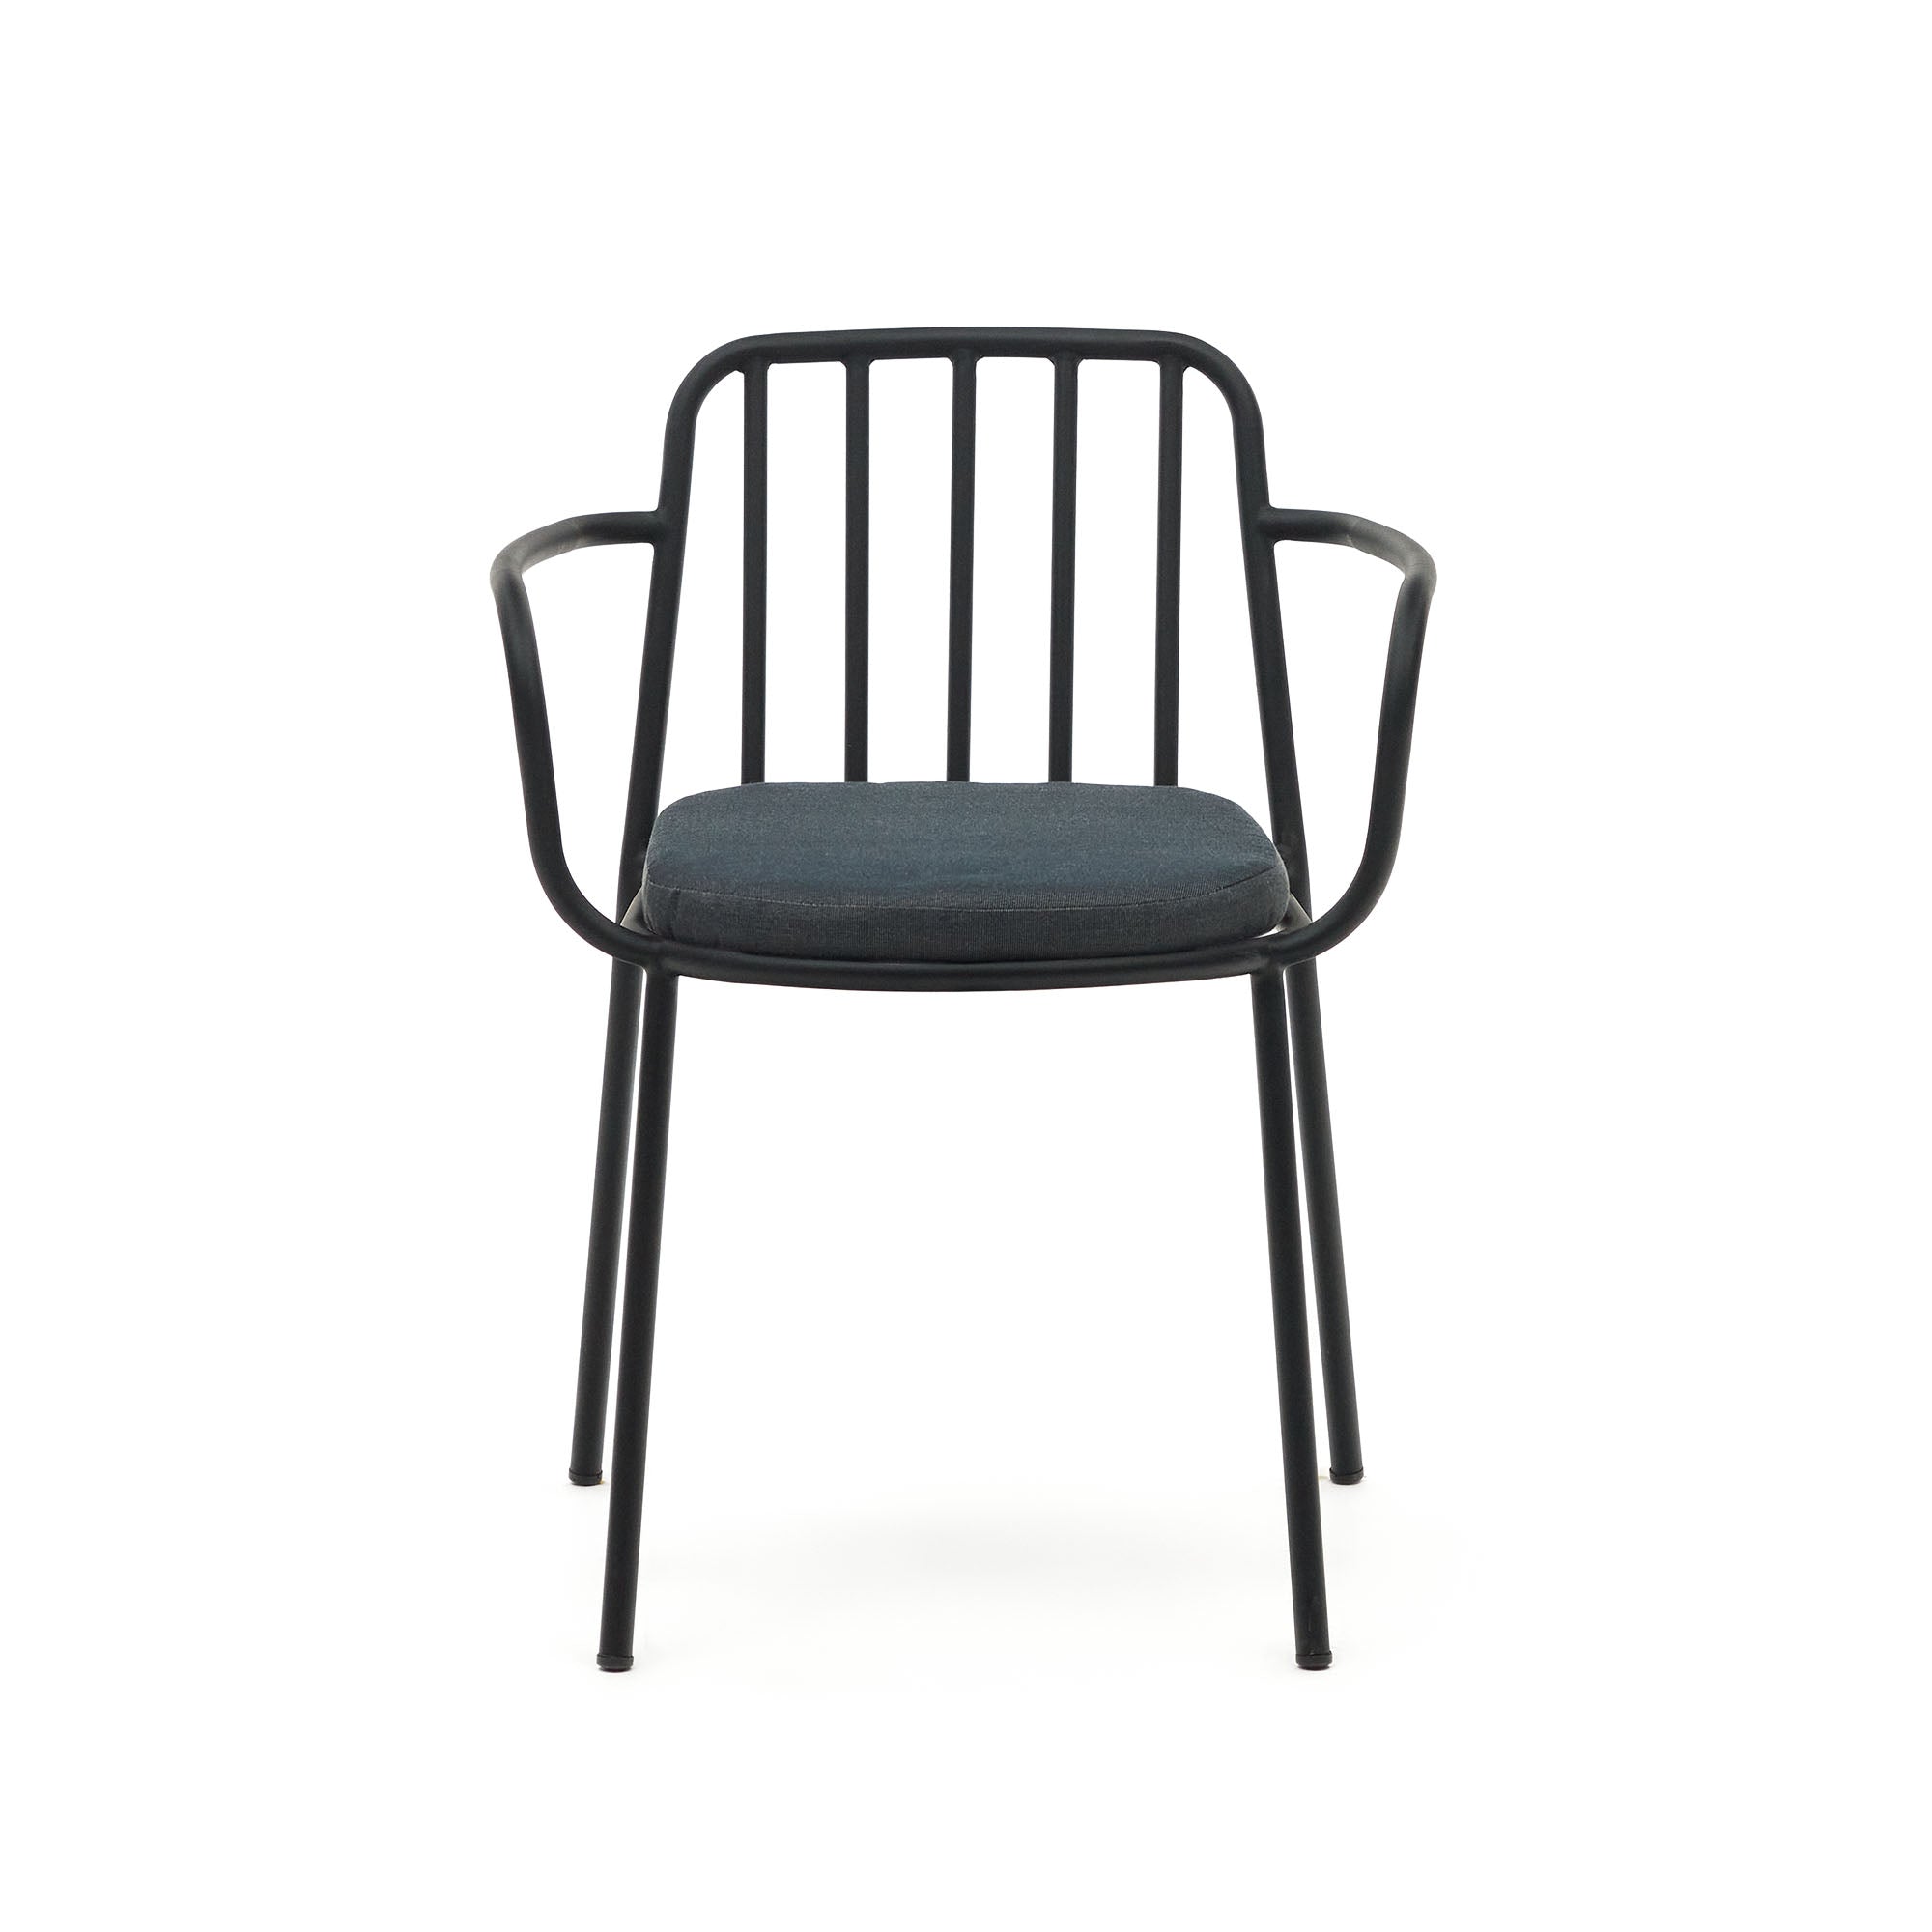 Bramant stackable steel chair with black finish